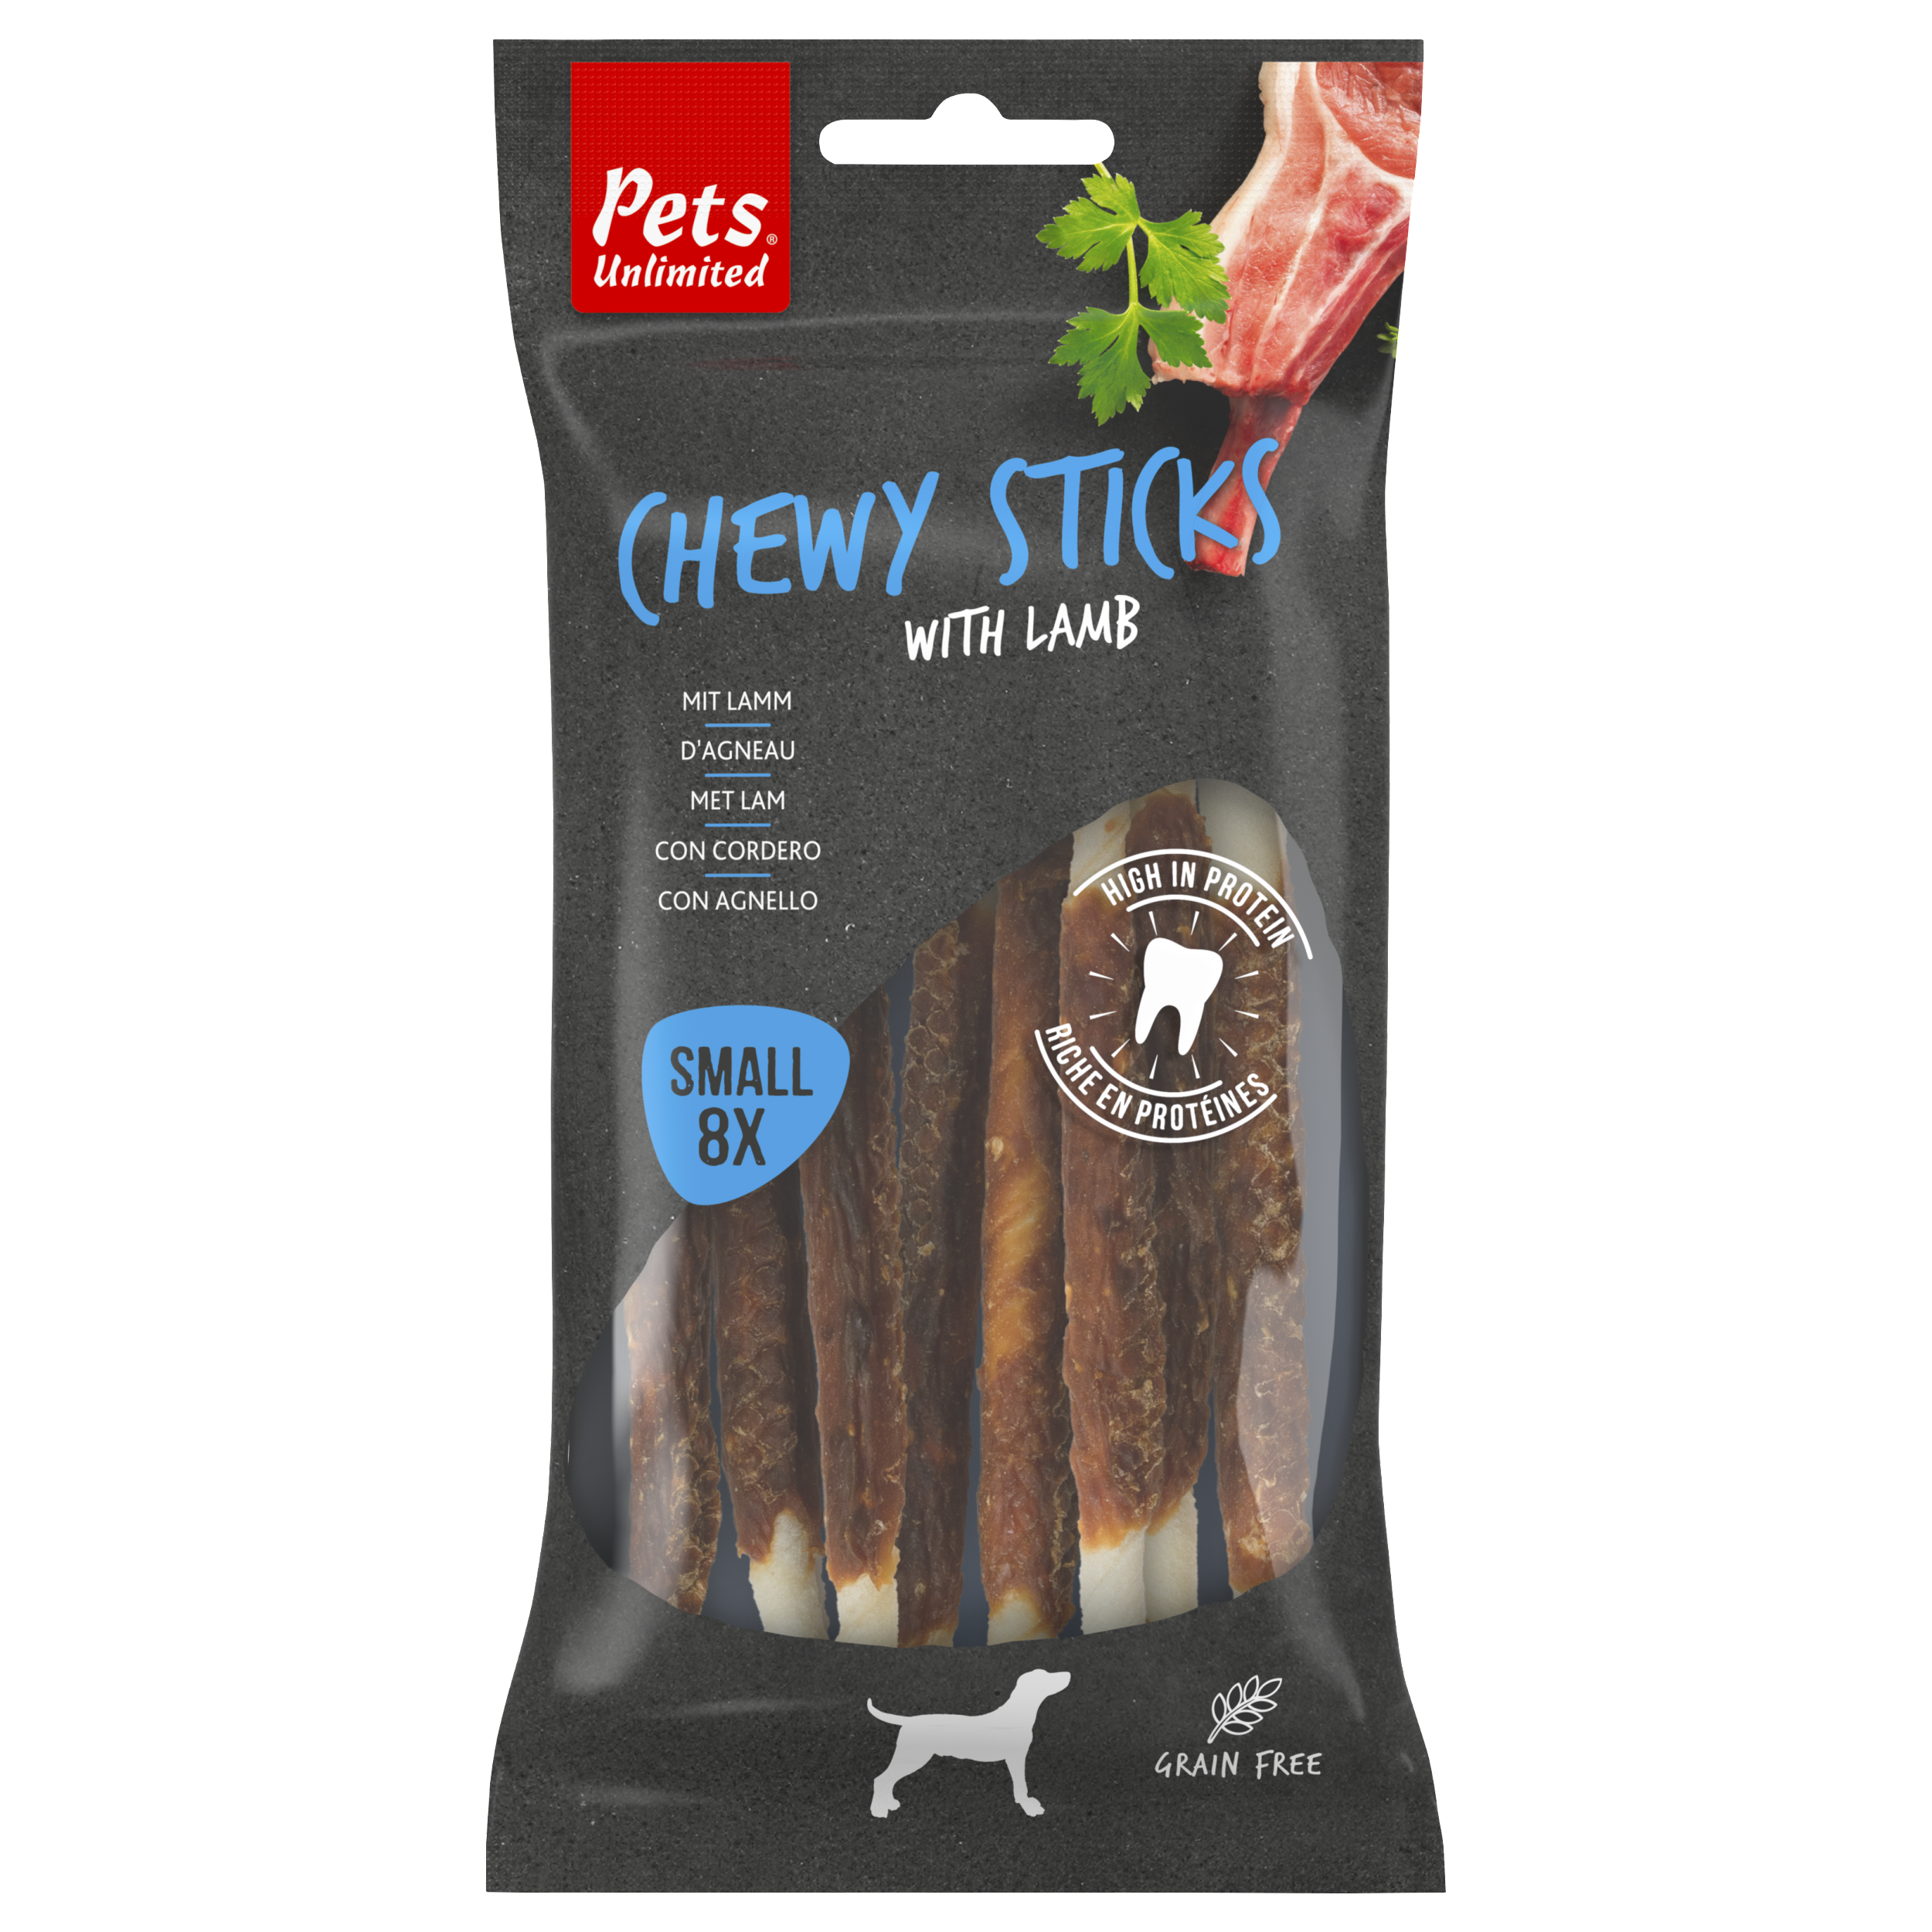 Chewy sticks with lamb small, 8 pieces